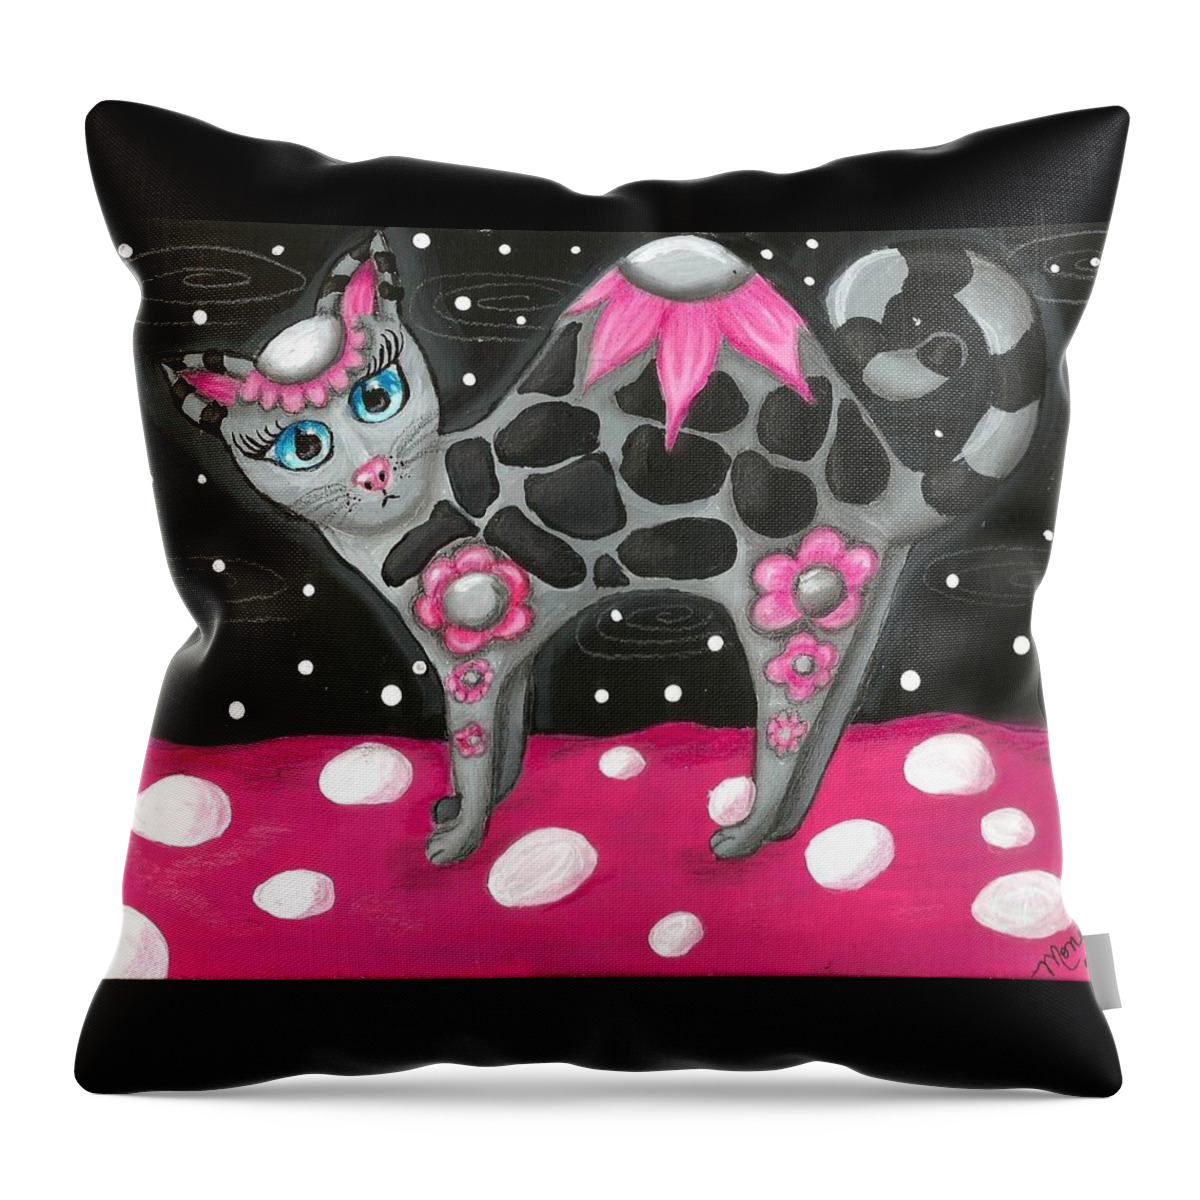 Pink Black Whimsical Kitty Cat Polka Dot Grey Blue Eyes Painting Colorful Vibrant Fun Throw Pillow featuring the painting Whimsical Black Pink Floral Kitty Cat by Monica Resinger